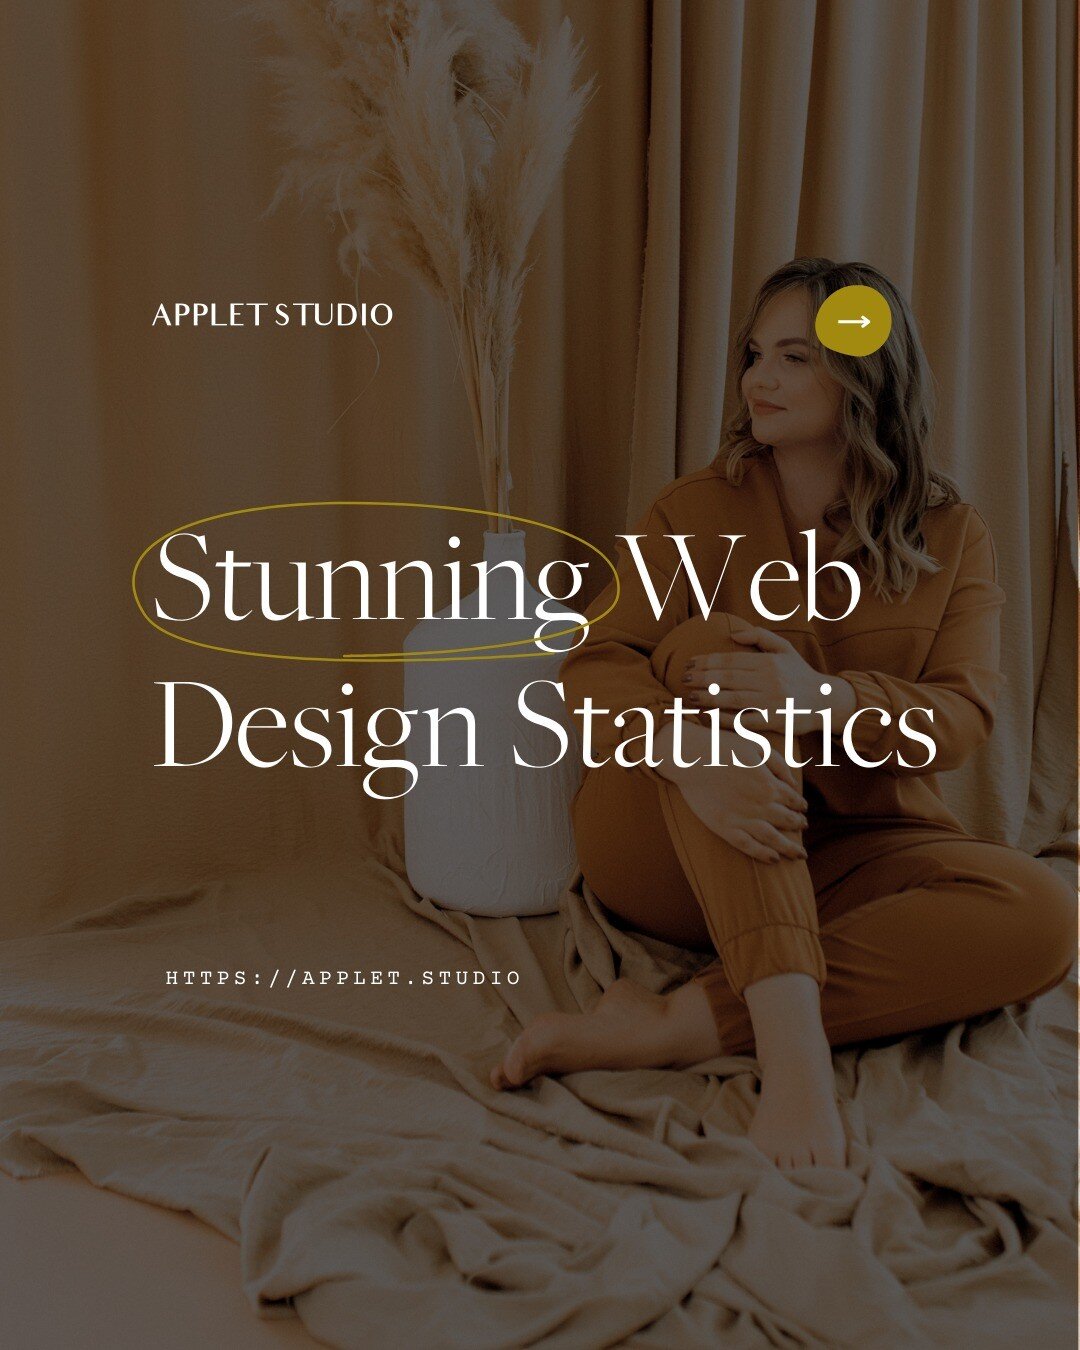 Attention business owners! Did you know that website design is the #1 factor that users consider when judging a company's credibility? A whopping 48% of users agree! And it's not just about aesthetics either - 38% of visitors will stop browsing a web